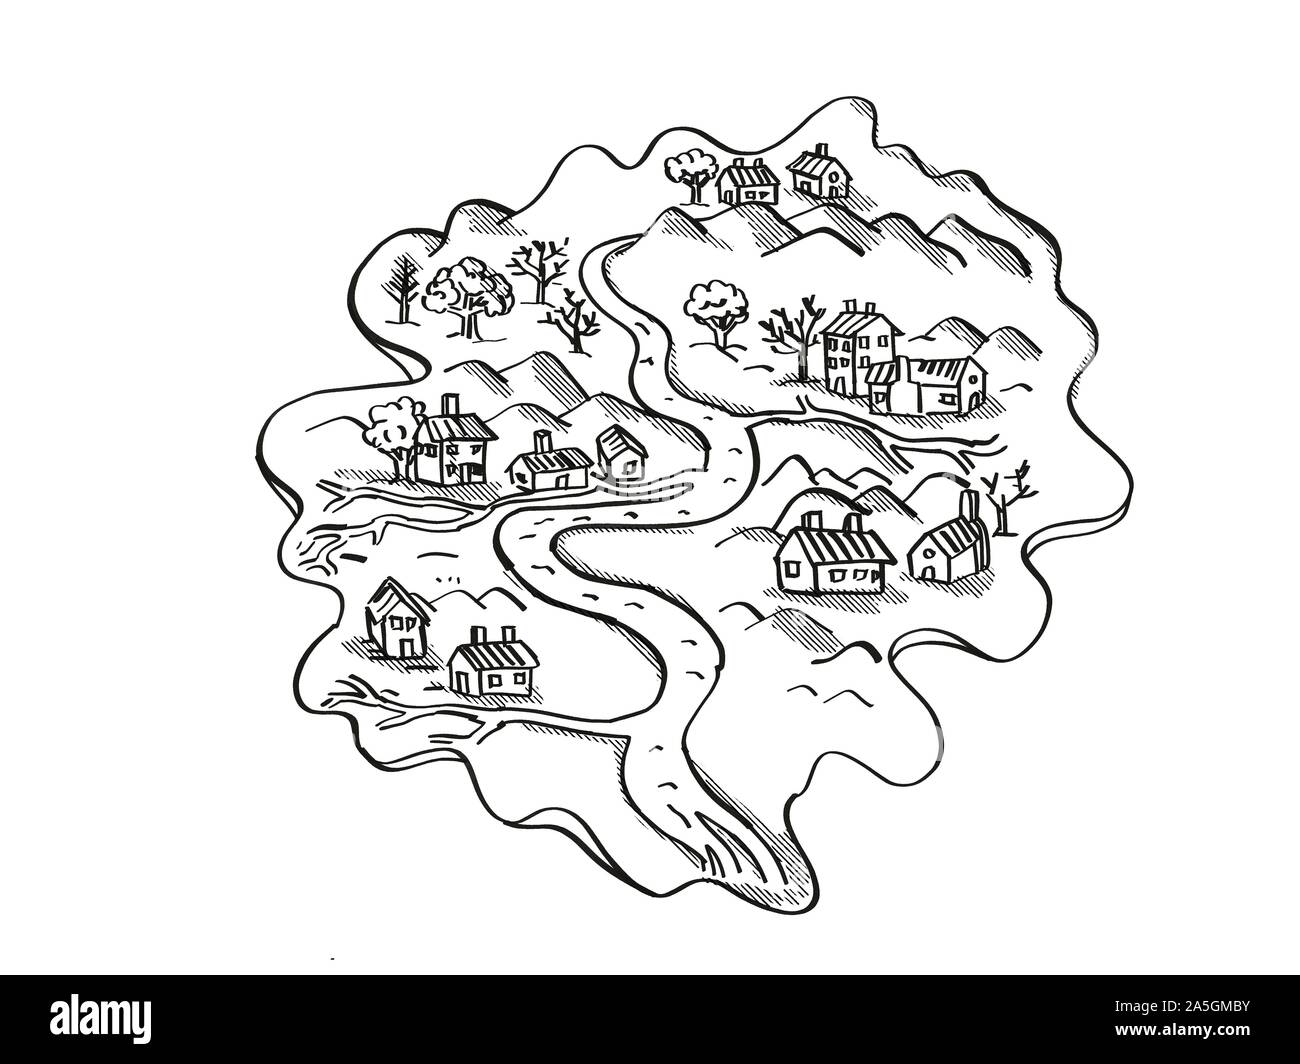 Retro cartoon style drawing of a vintage fantasy or treasure map showing an Island With River and Houses on isolated white background done in black an Stock Photo